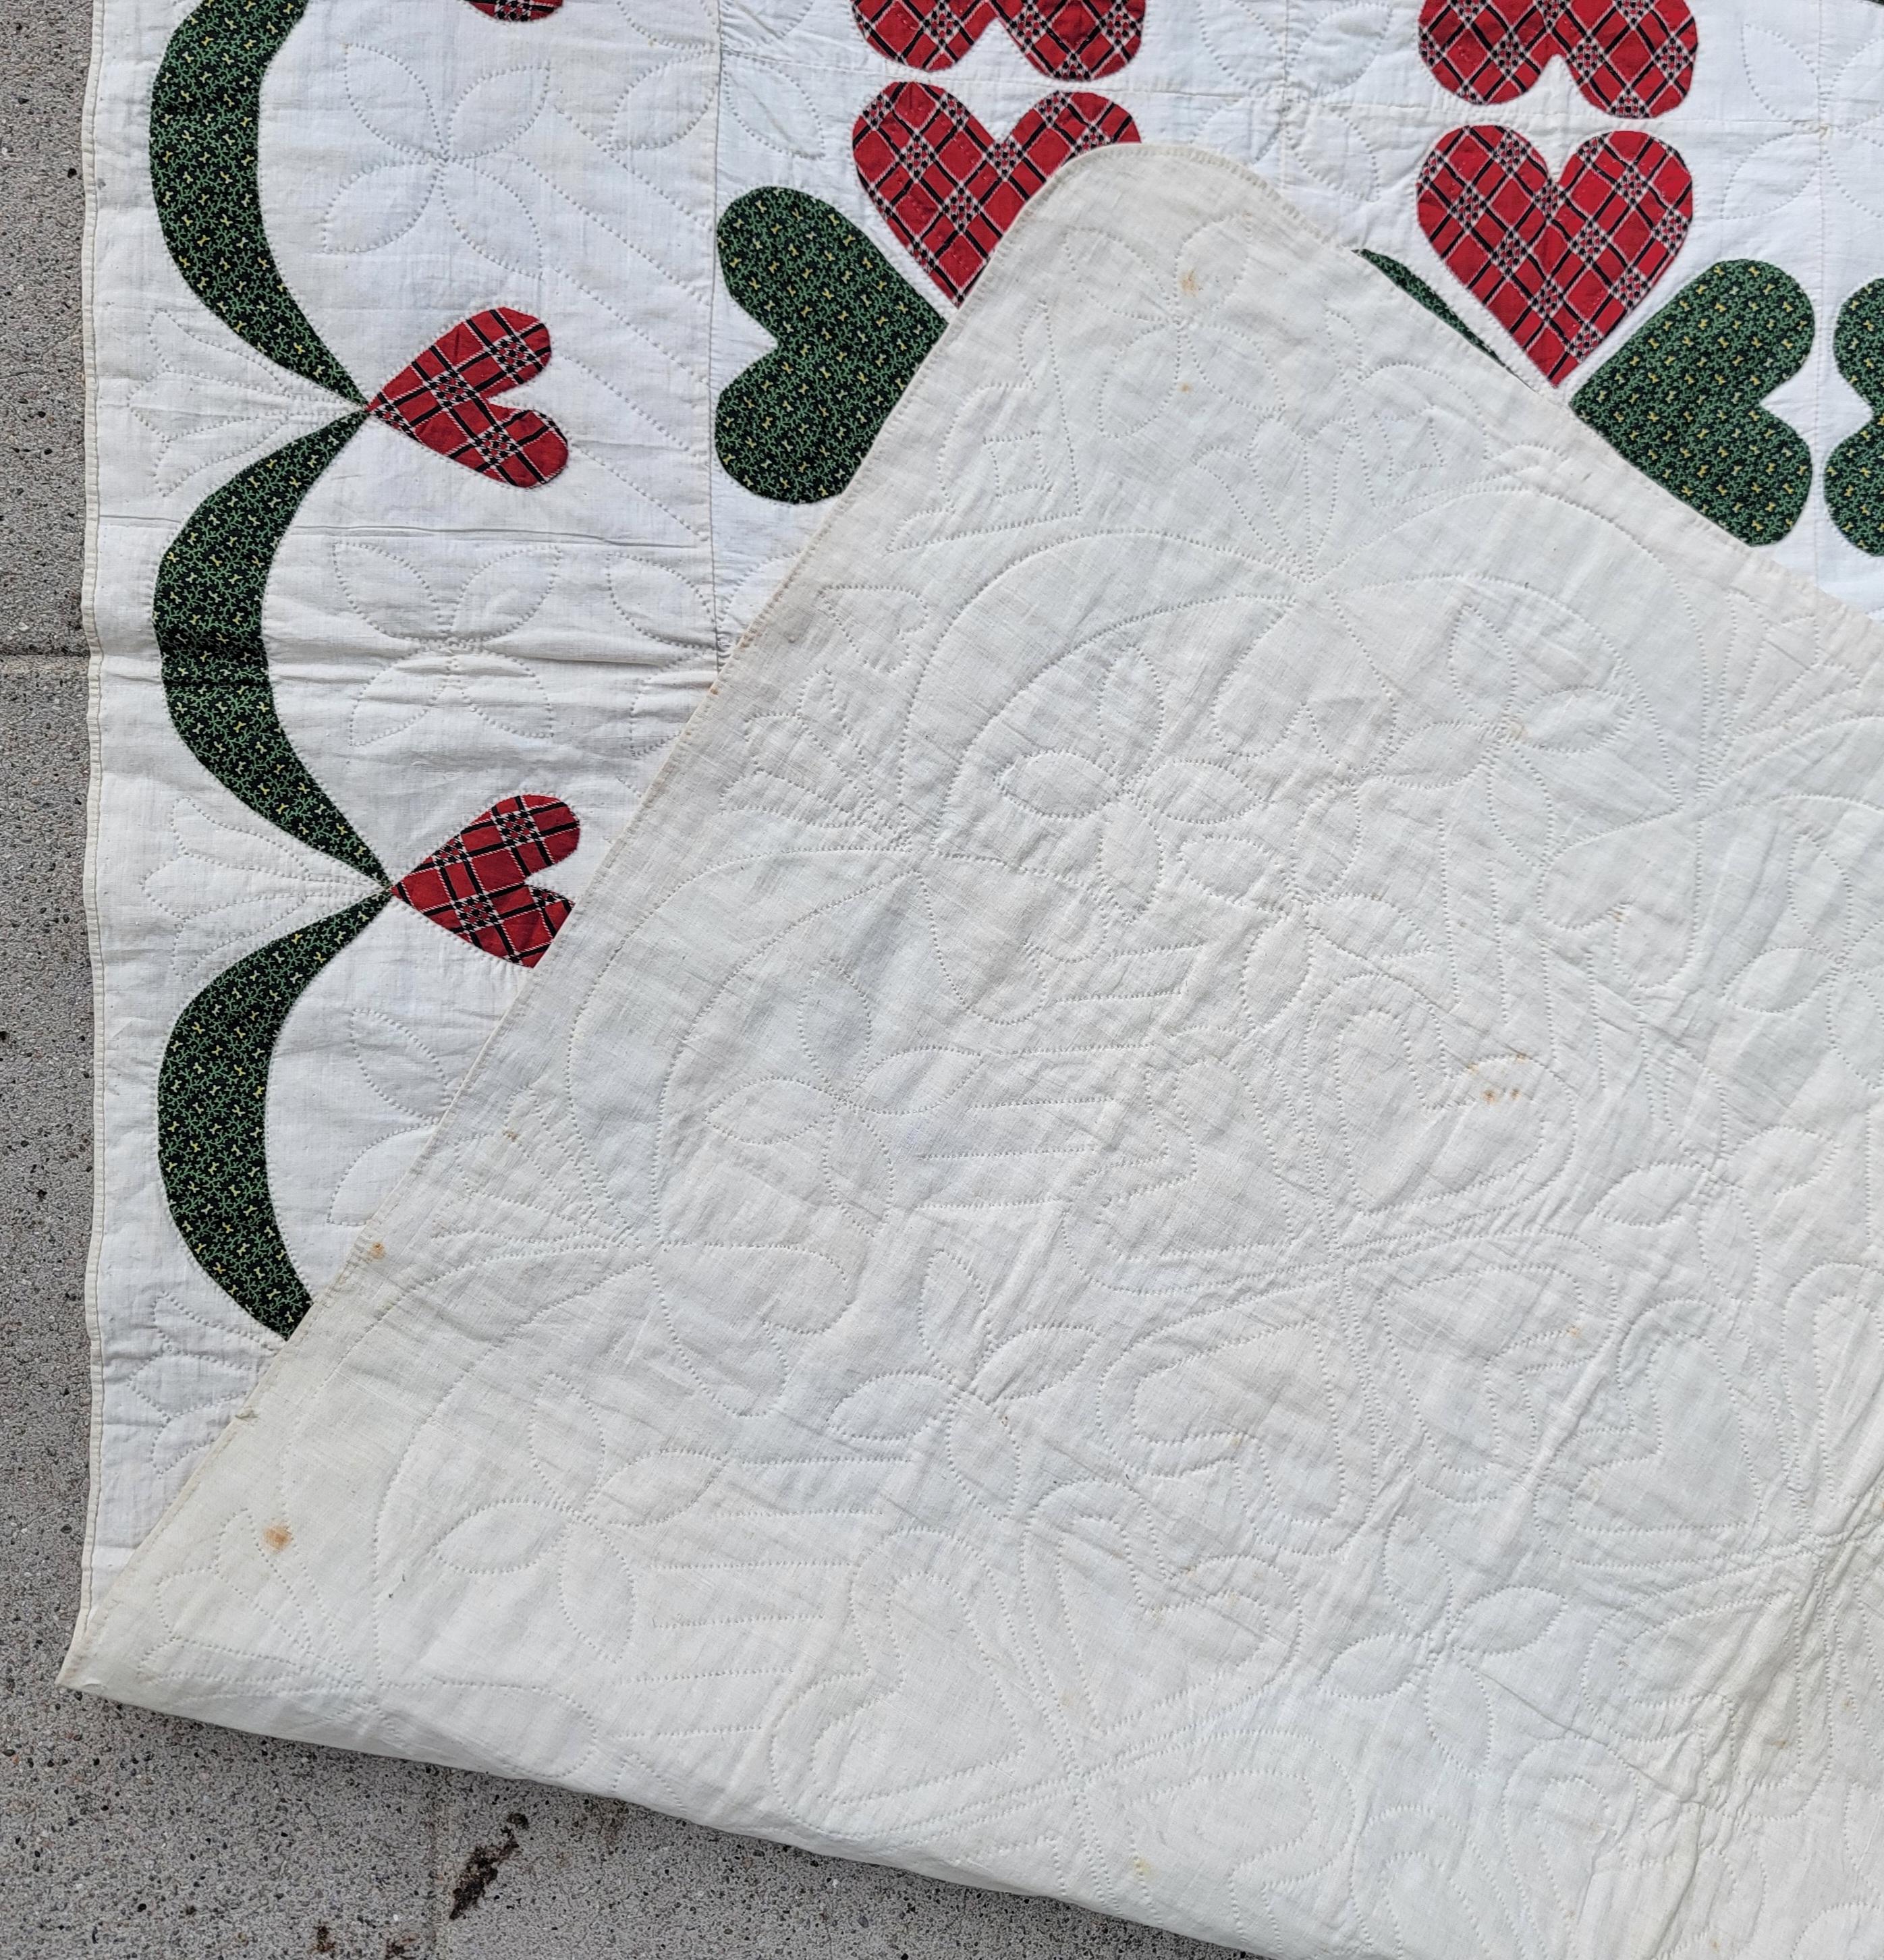 19thc Super rare double hearts applique quilt from Pennsylvania. This quilt has very fine piecework and quilting.Very nice quilted hearts along with applique hearts from a private collection.